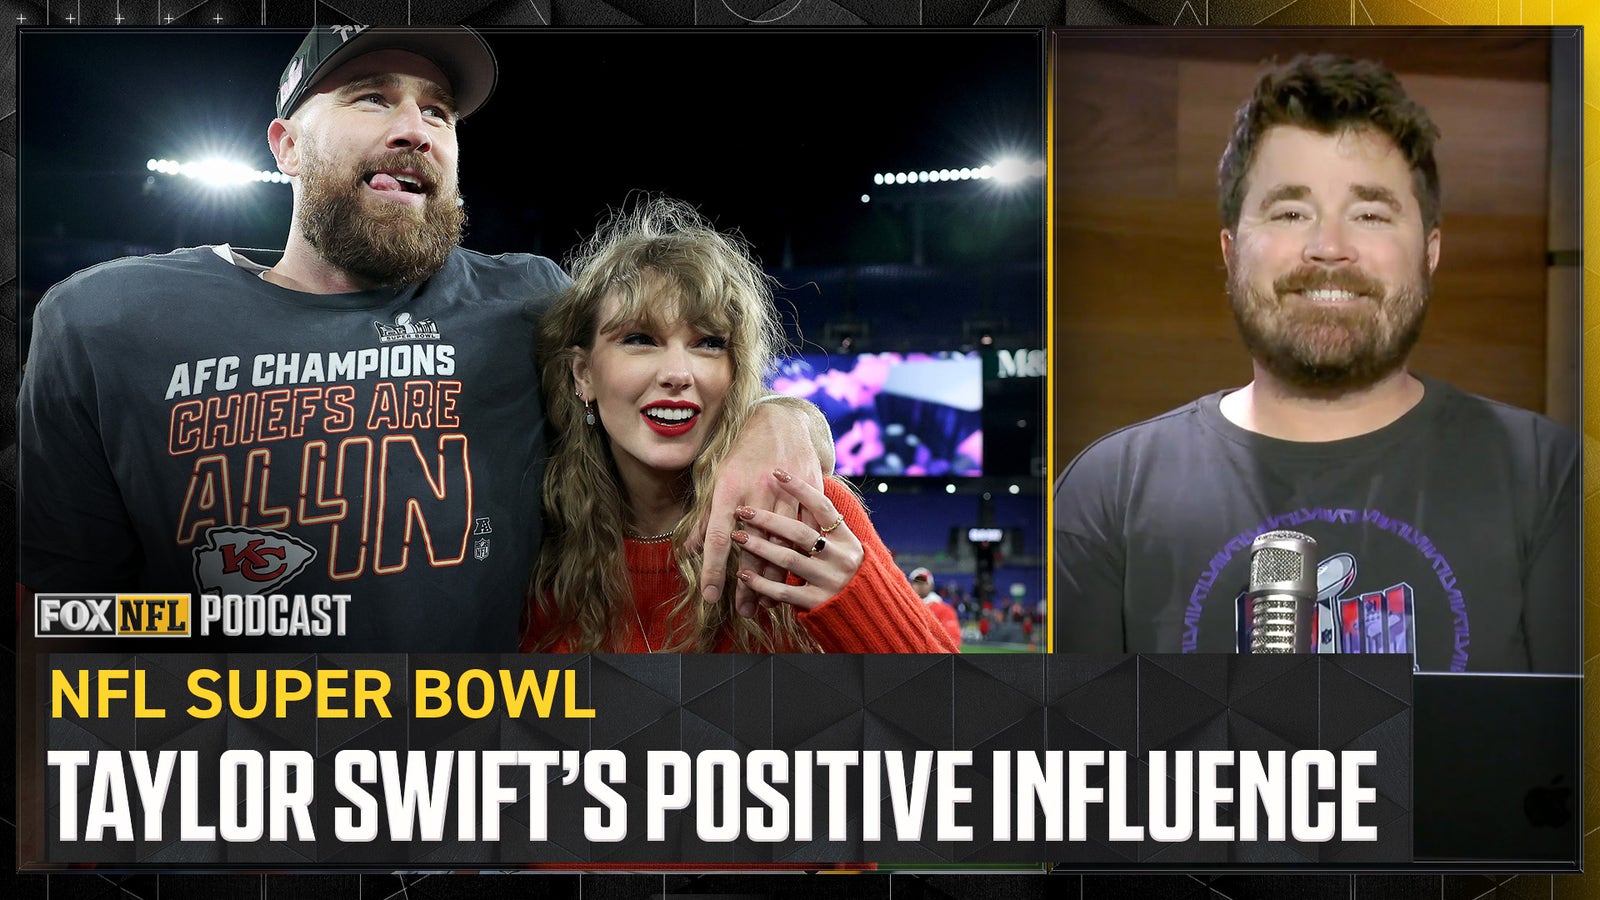 Is Taylor Swift a good thing for the Kansas City Chiefs, Super Bowl? 